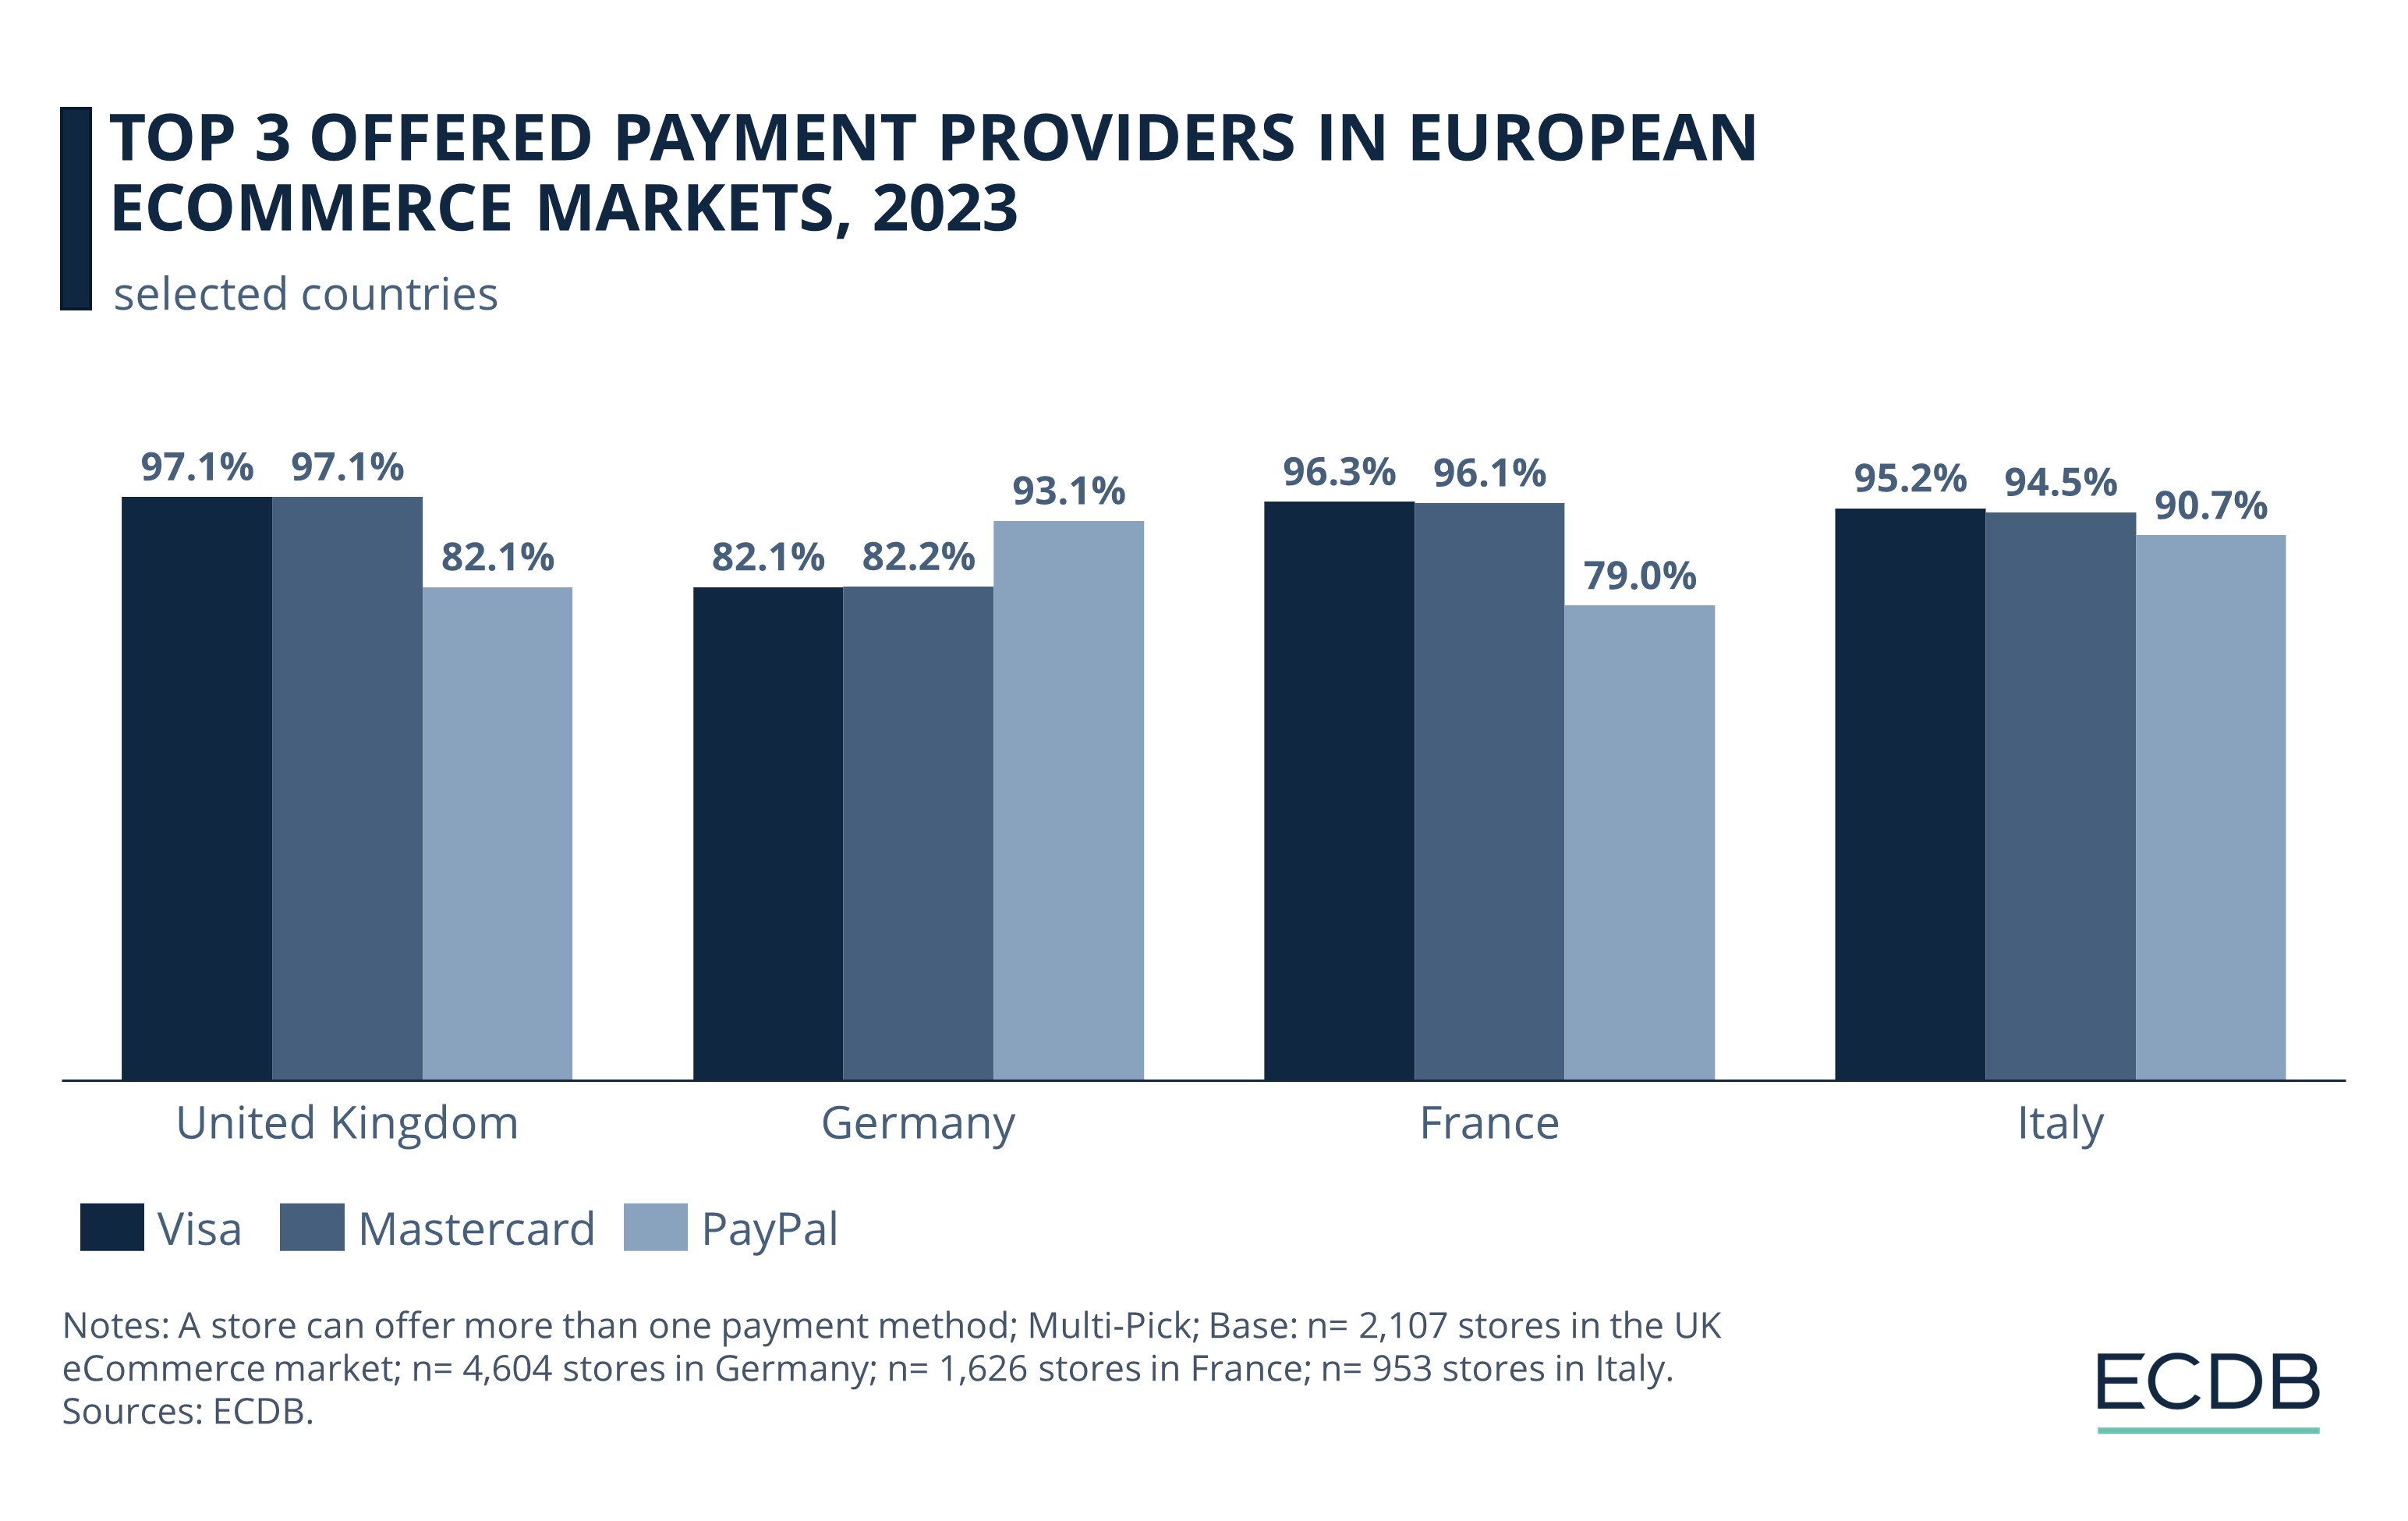 Top 3 Offered Payment Providers In European Ecommerce Markets, 2023